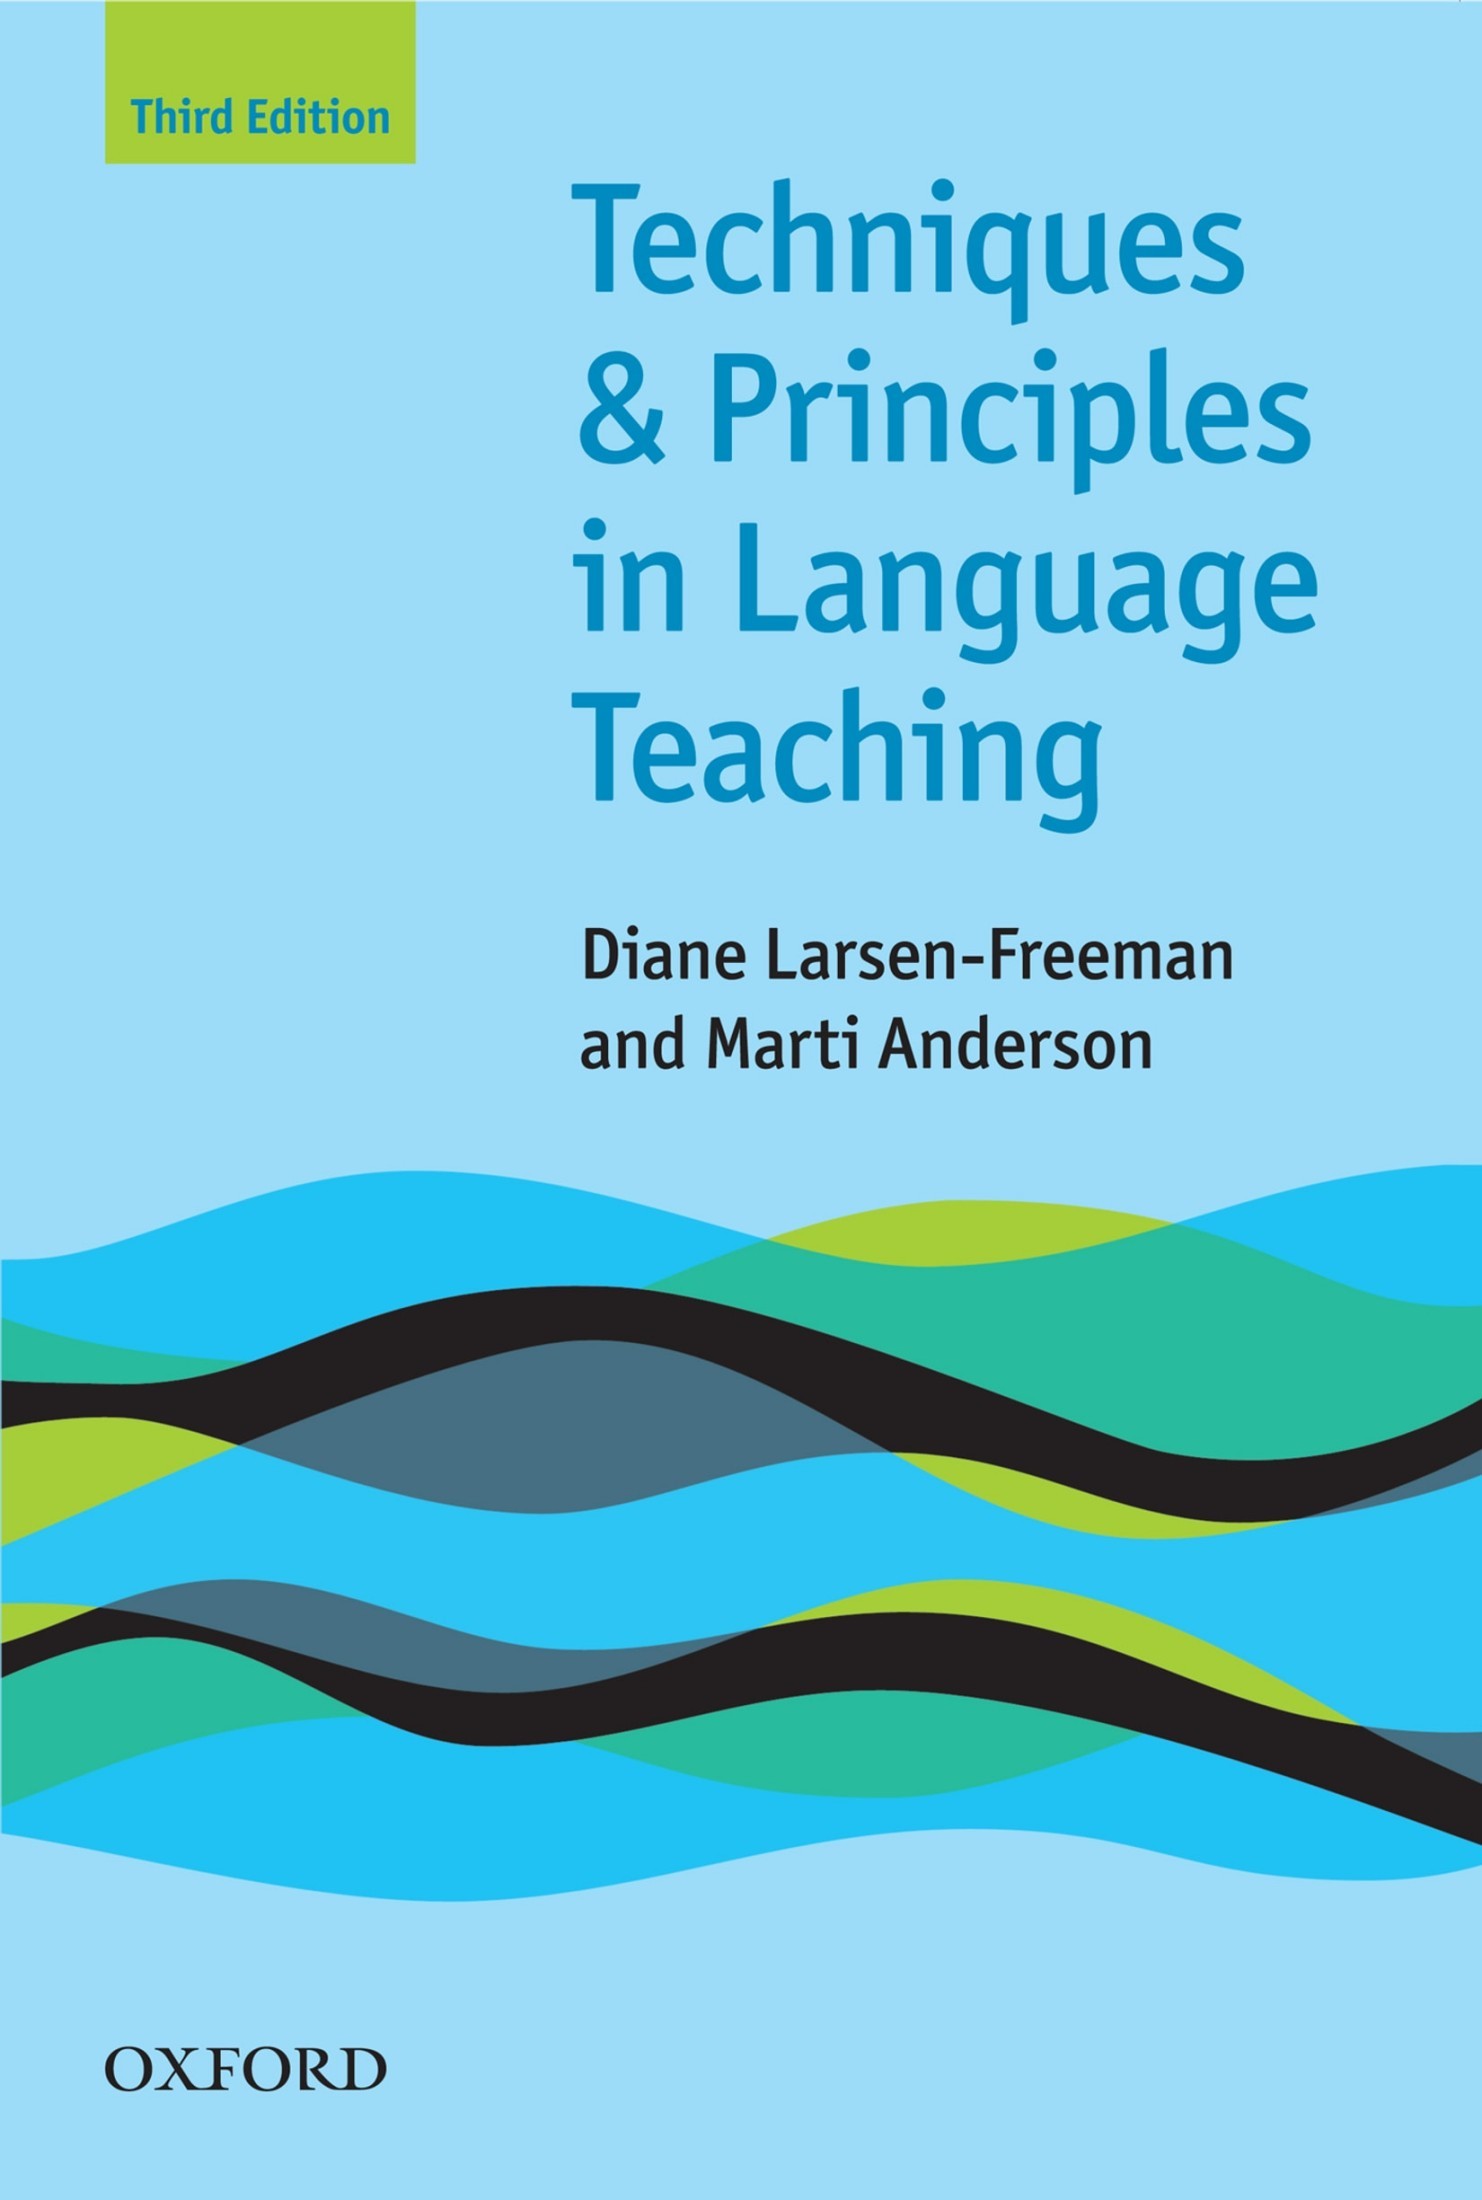 Techniques and Principles in Language Teaching 3rd Edition - Oxford Handbooks for Language Teachers